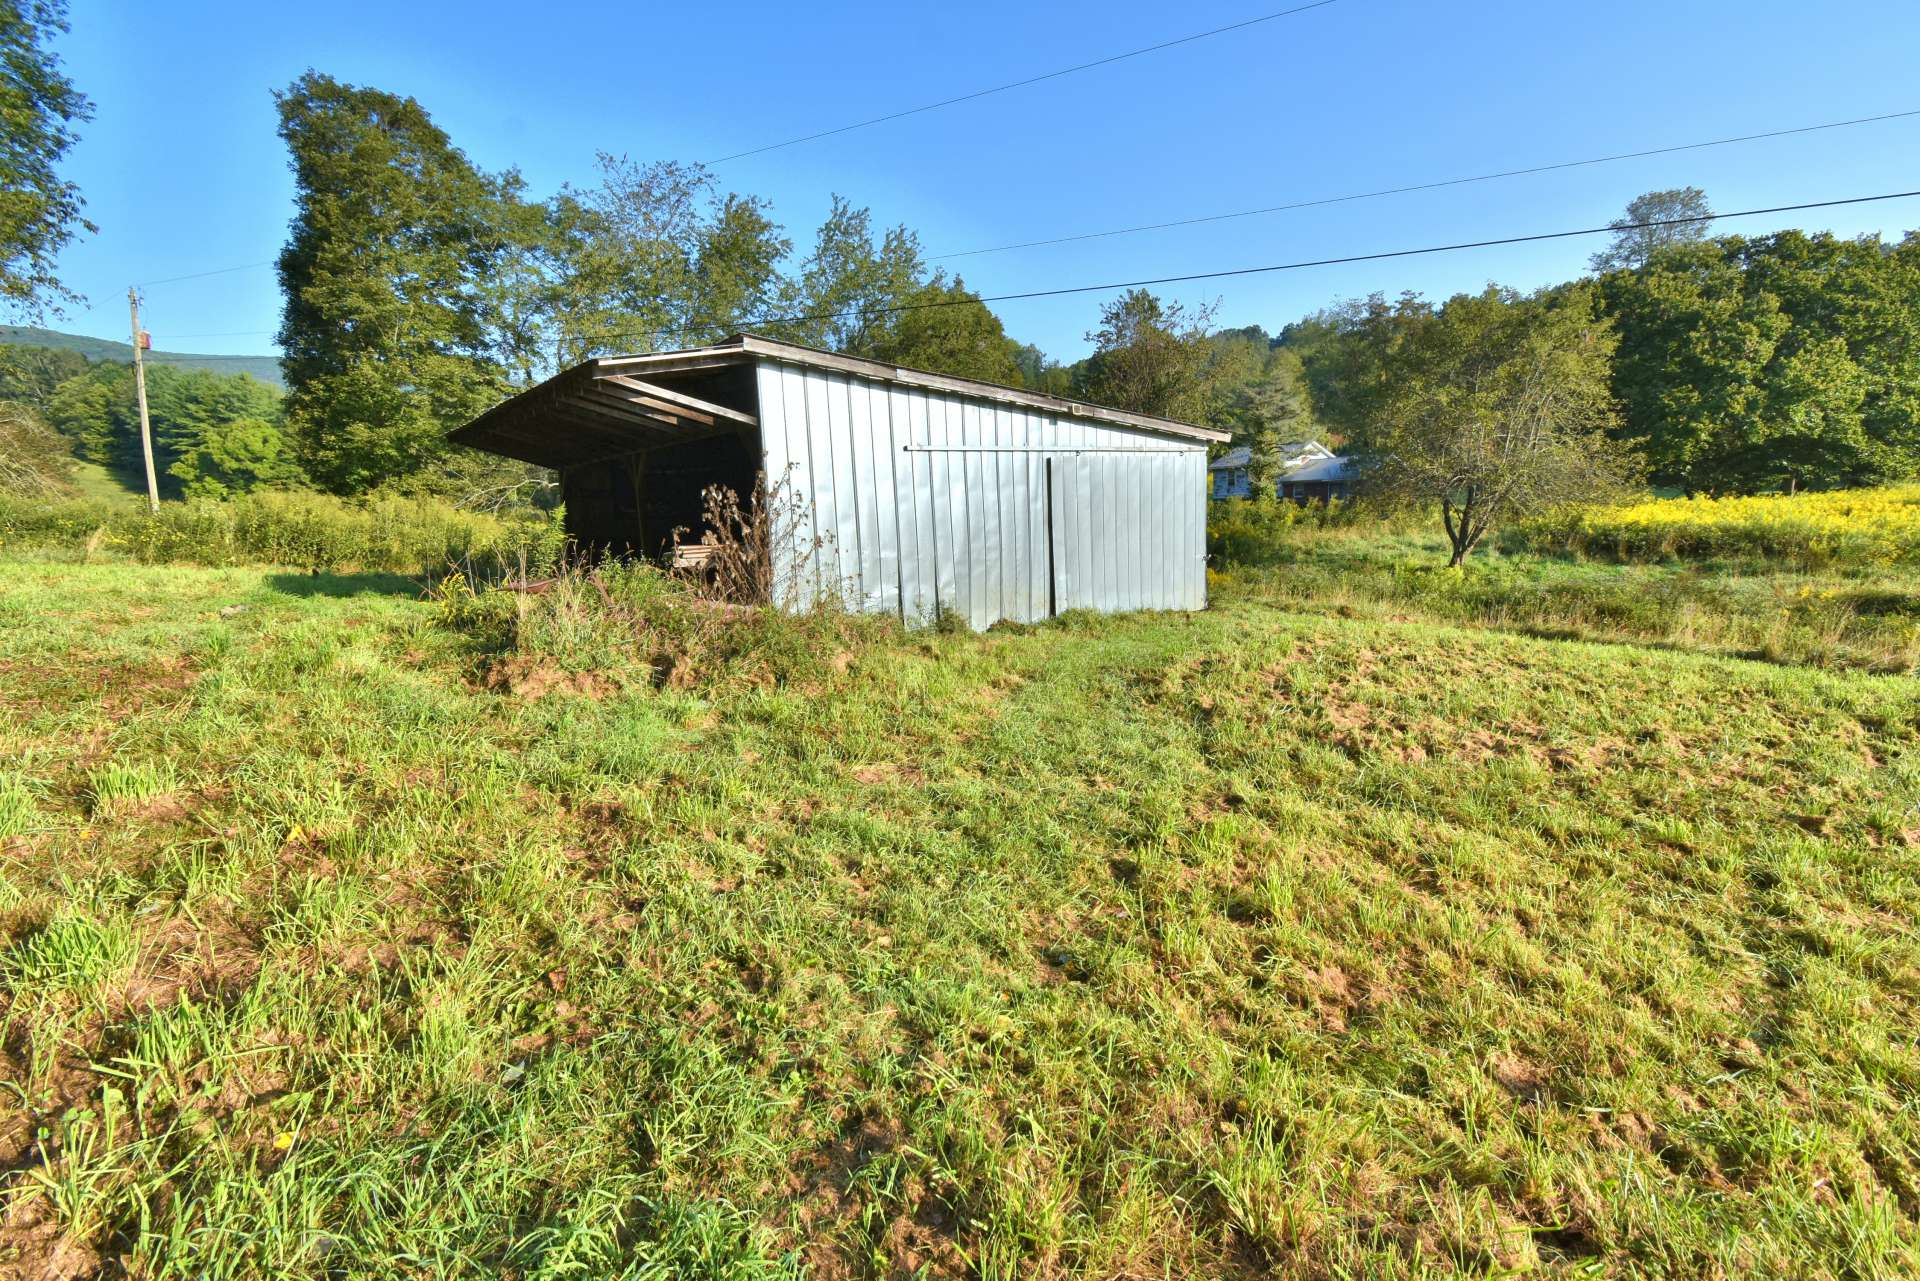 The barn offers an open shed area for equipment storage, as well as an enclosed area with electricity.  This will work nicely for equipment or workshop area.